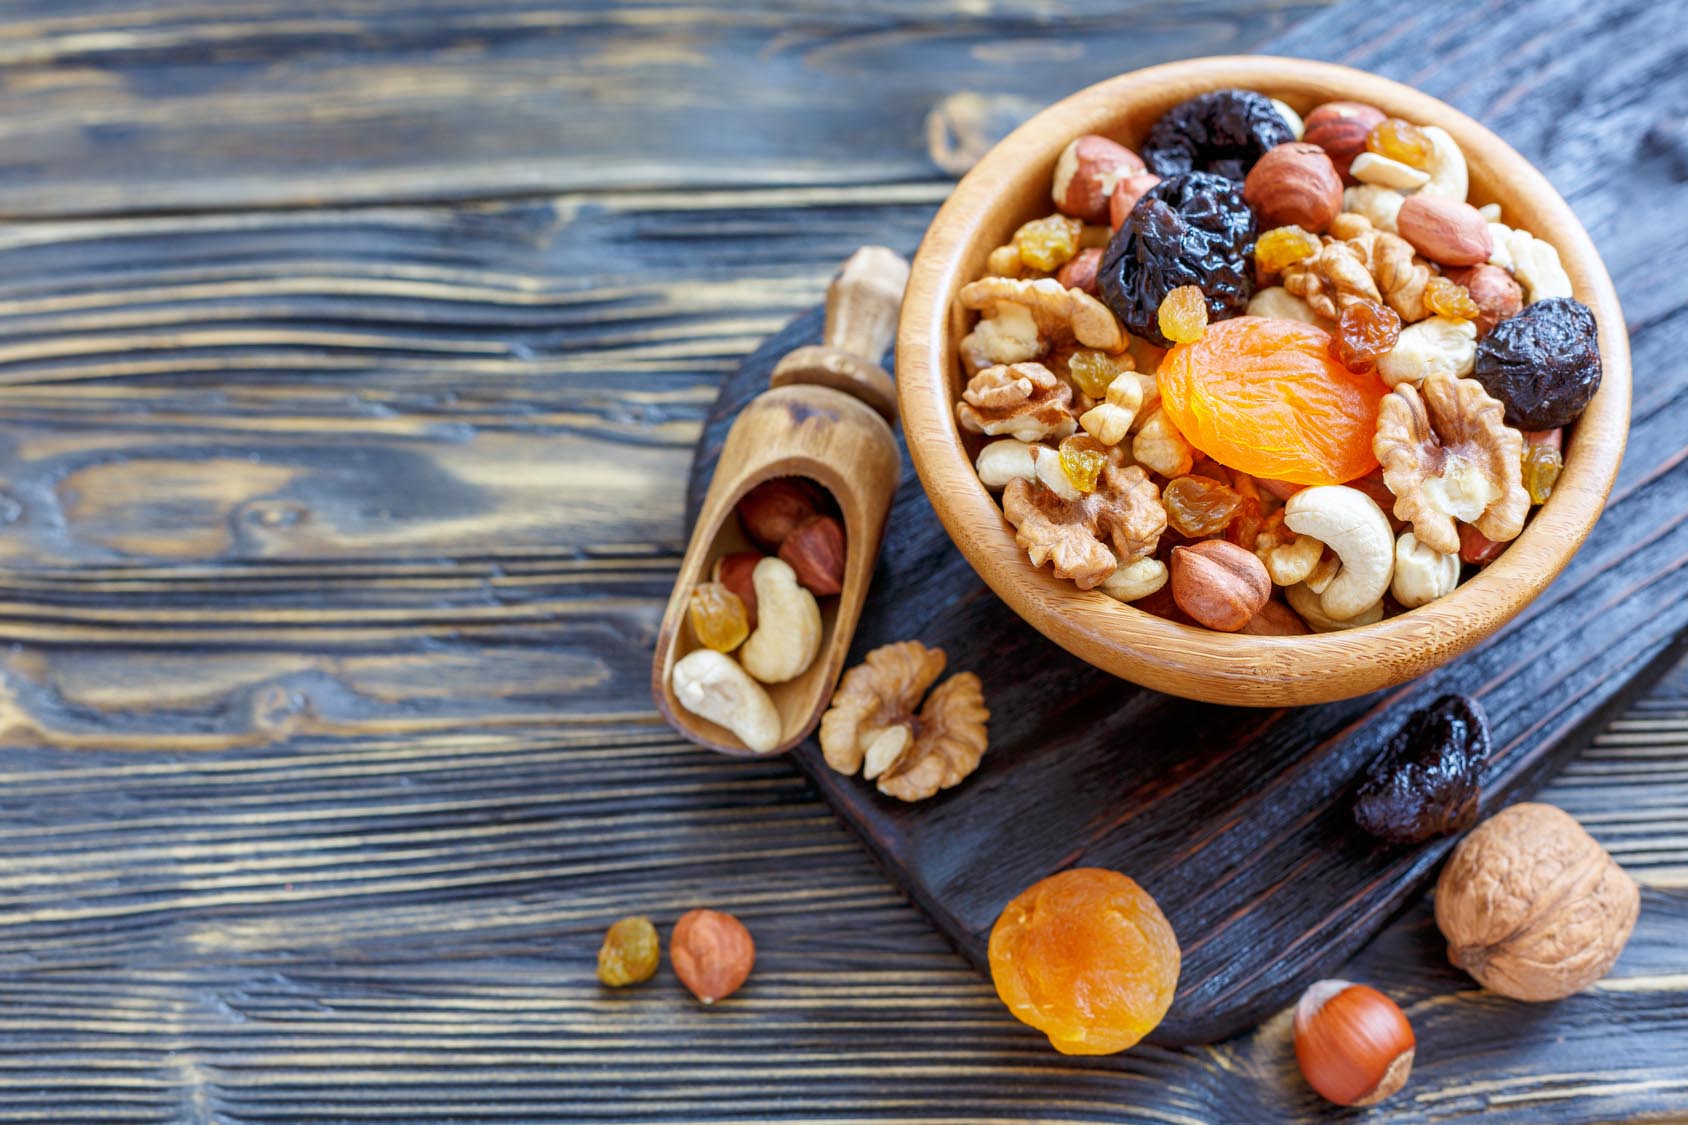 Trail mix in bowl and scattered nuts and dried fruit on wooden grey-washed counter. Gourmet Spice Company, Wholesale Food Distributor.